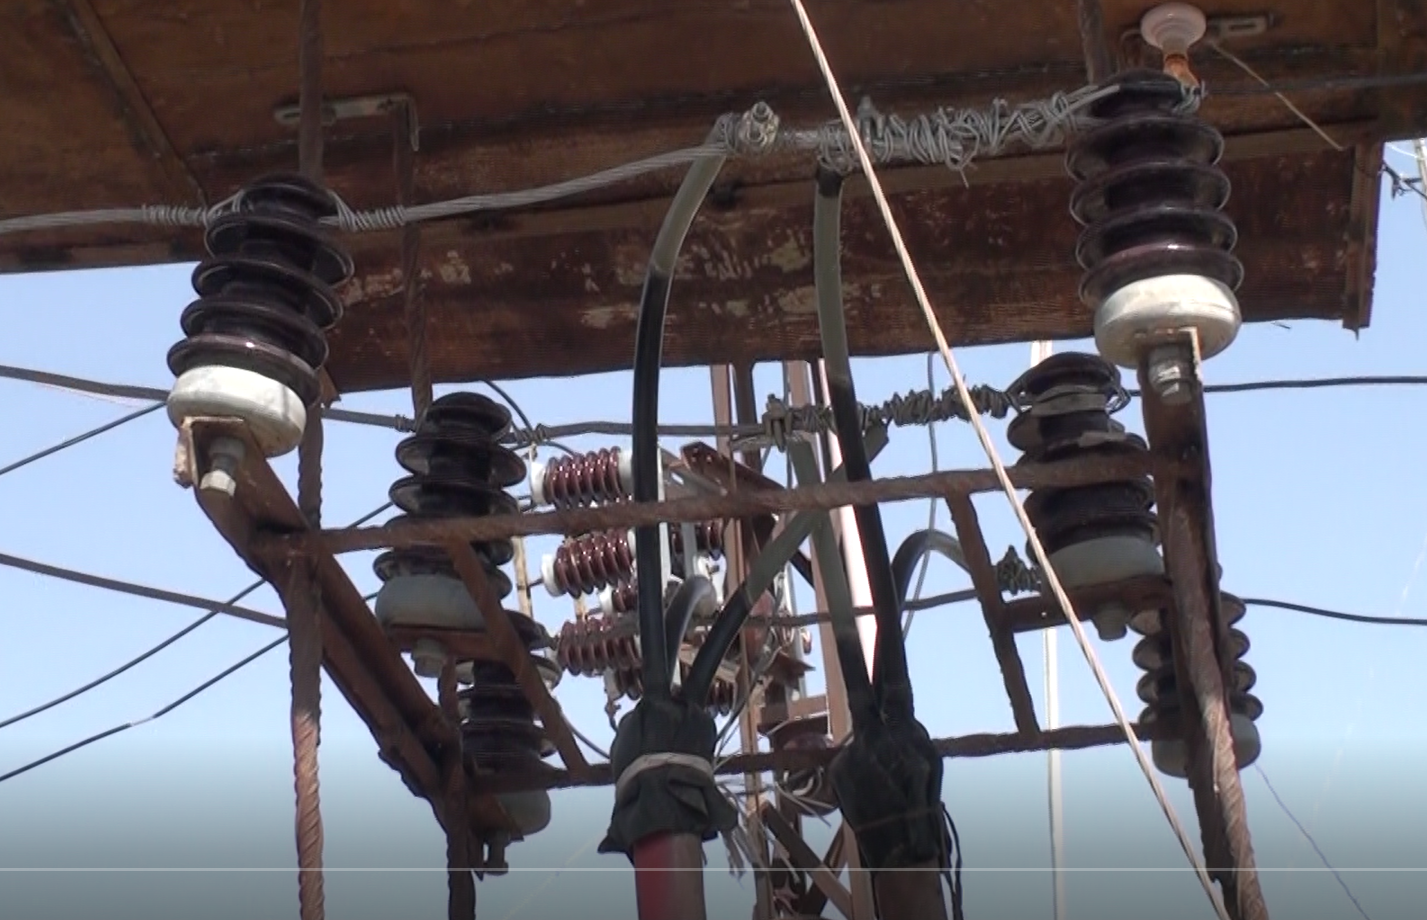 Detail of termination inside a substation